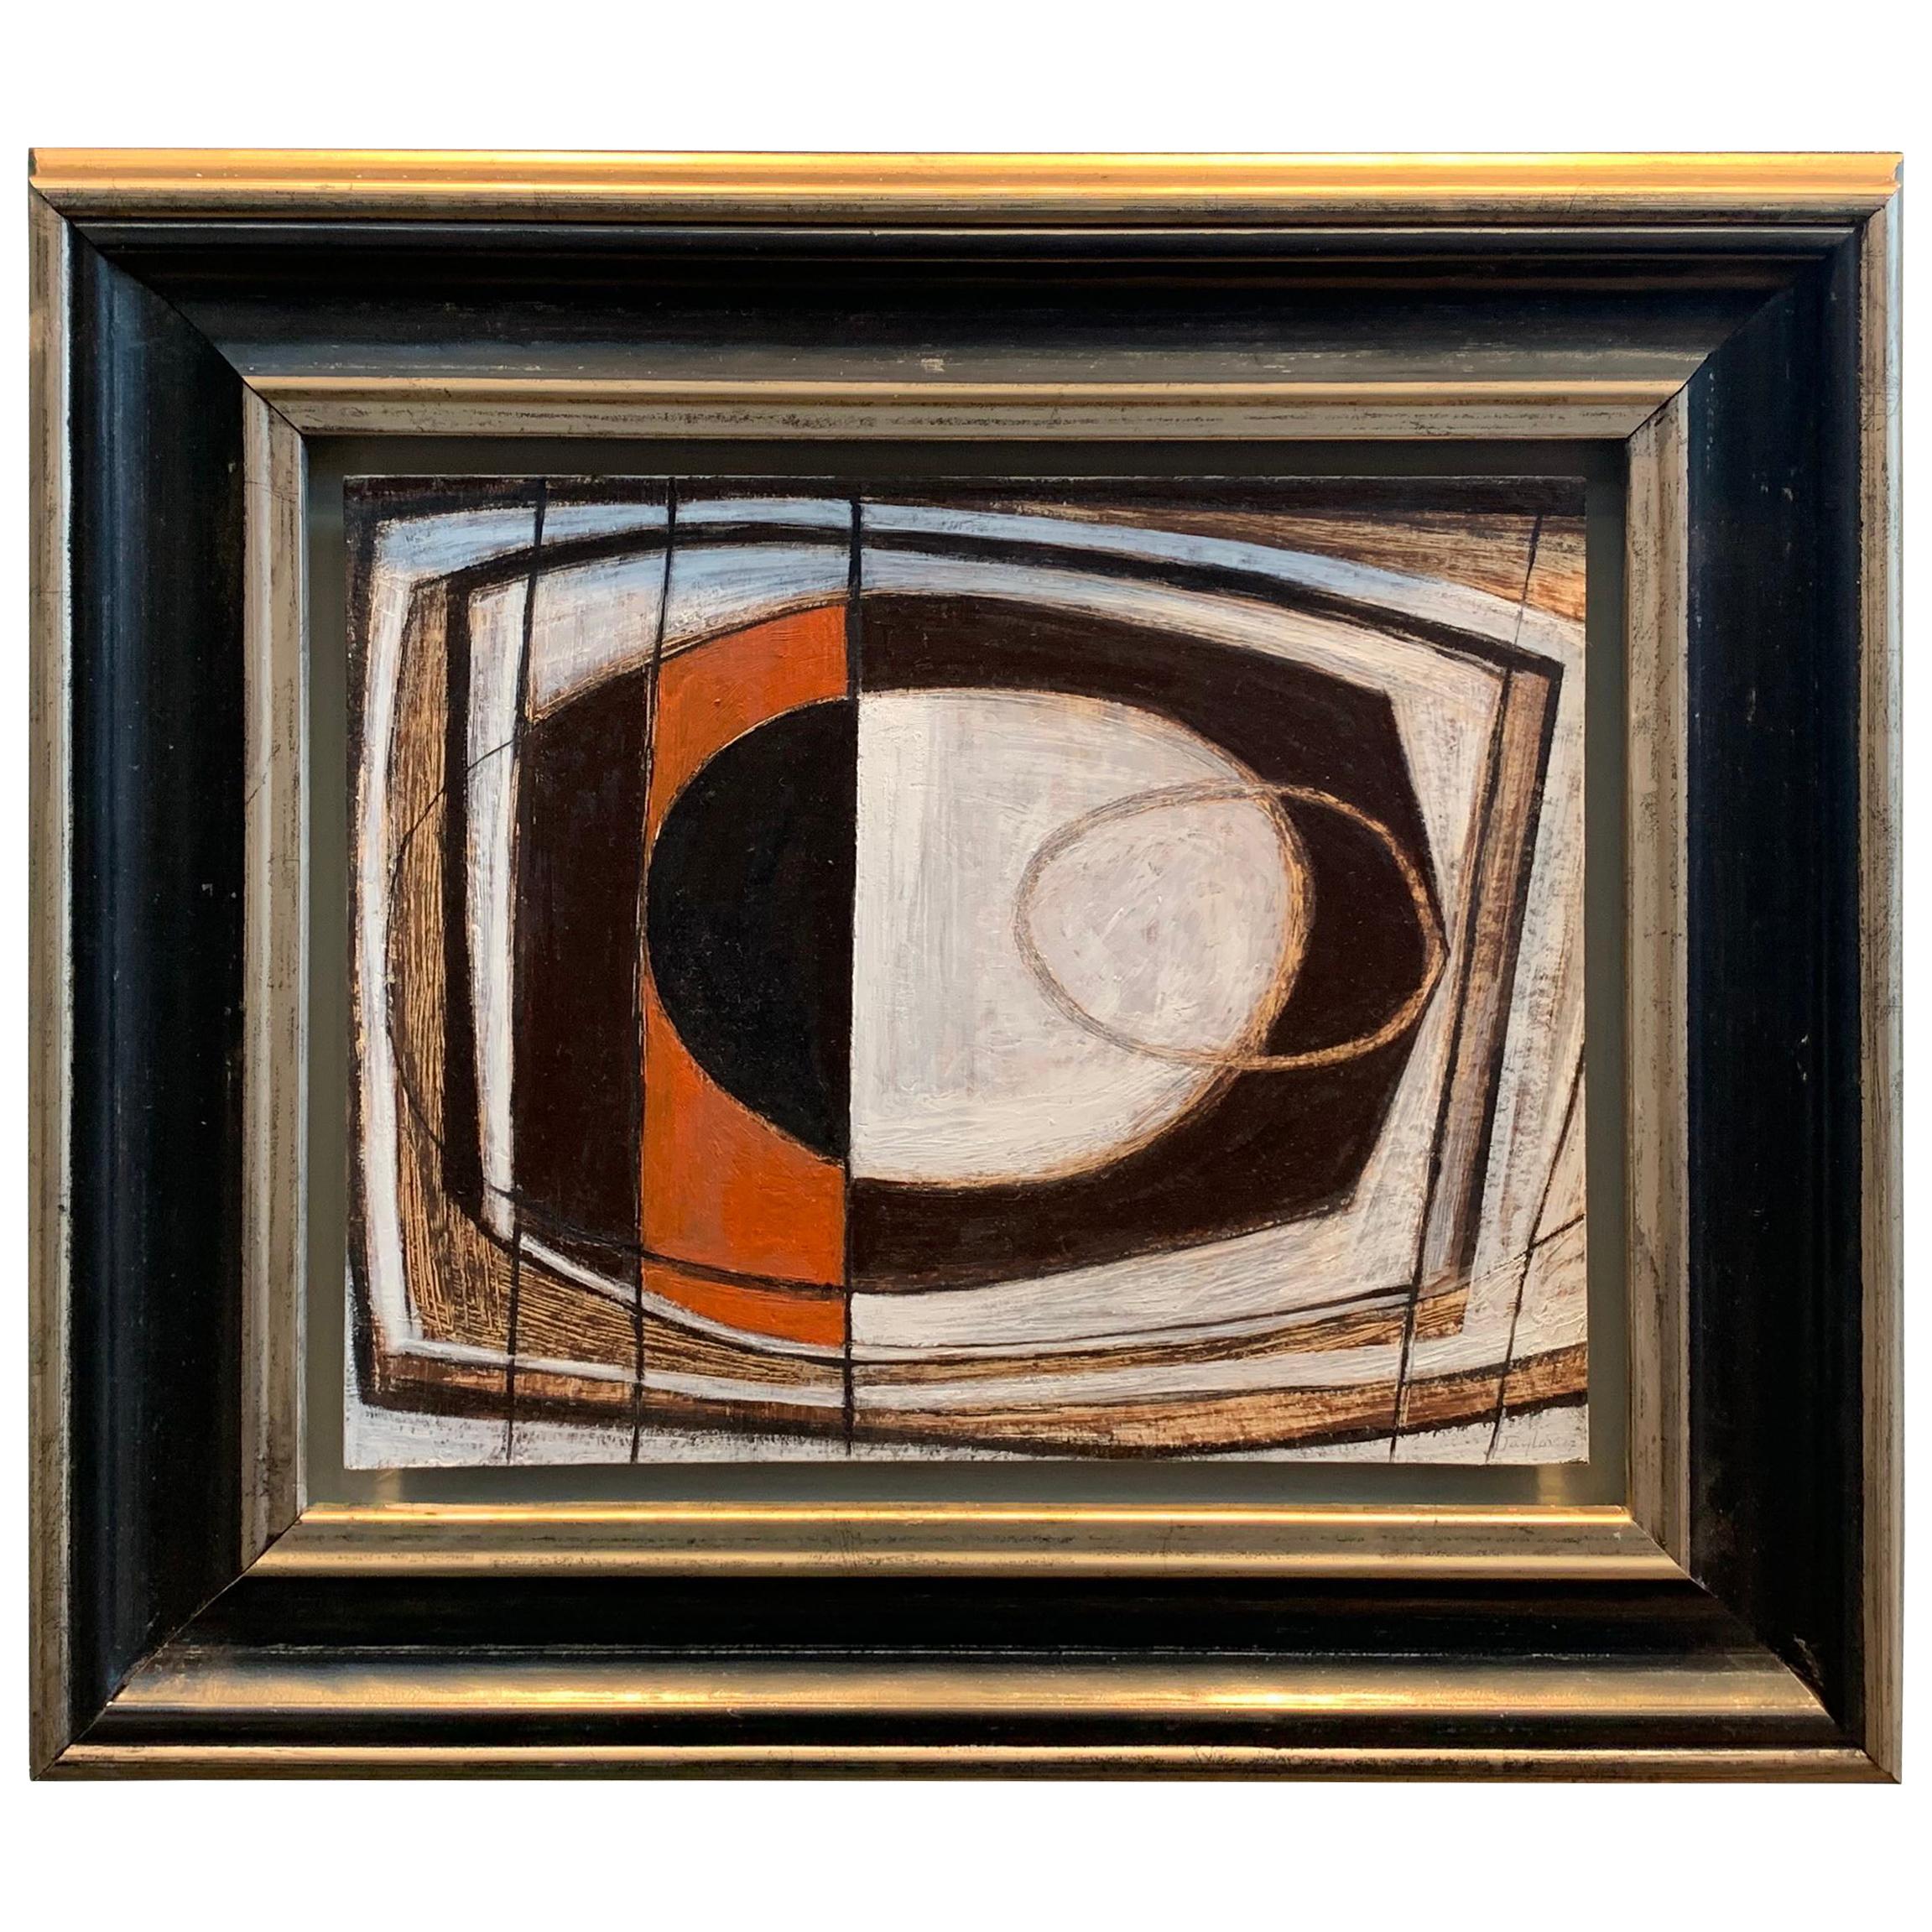 Black, White and Orange Painting by Artist John Taylor Abstract, England